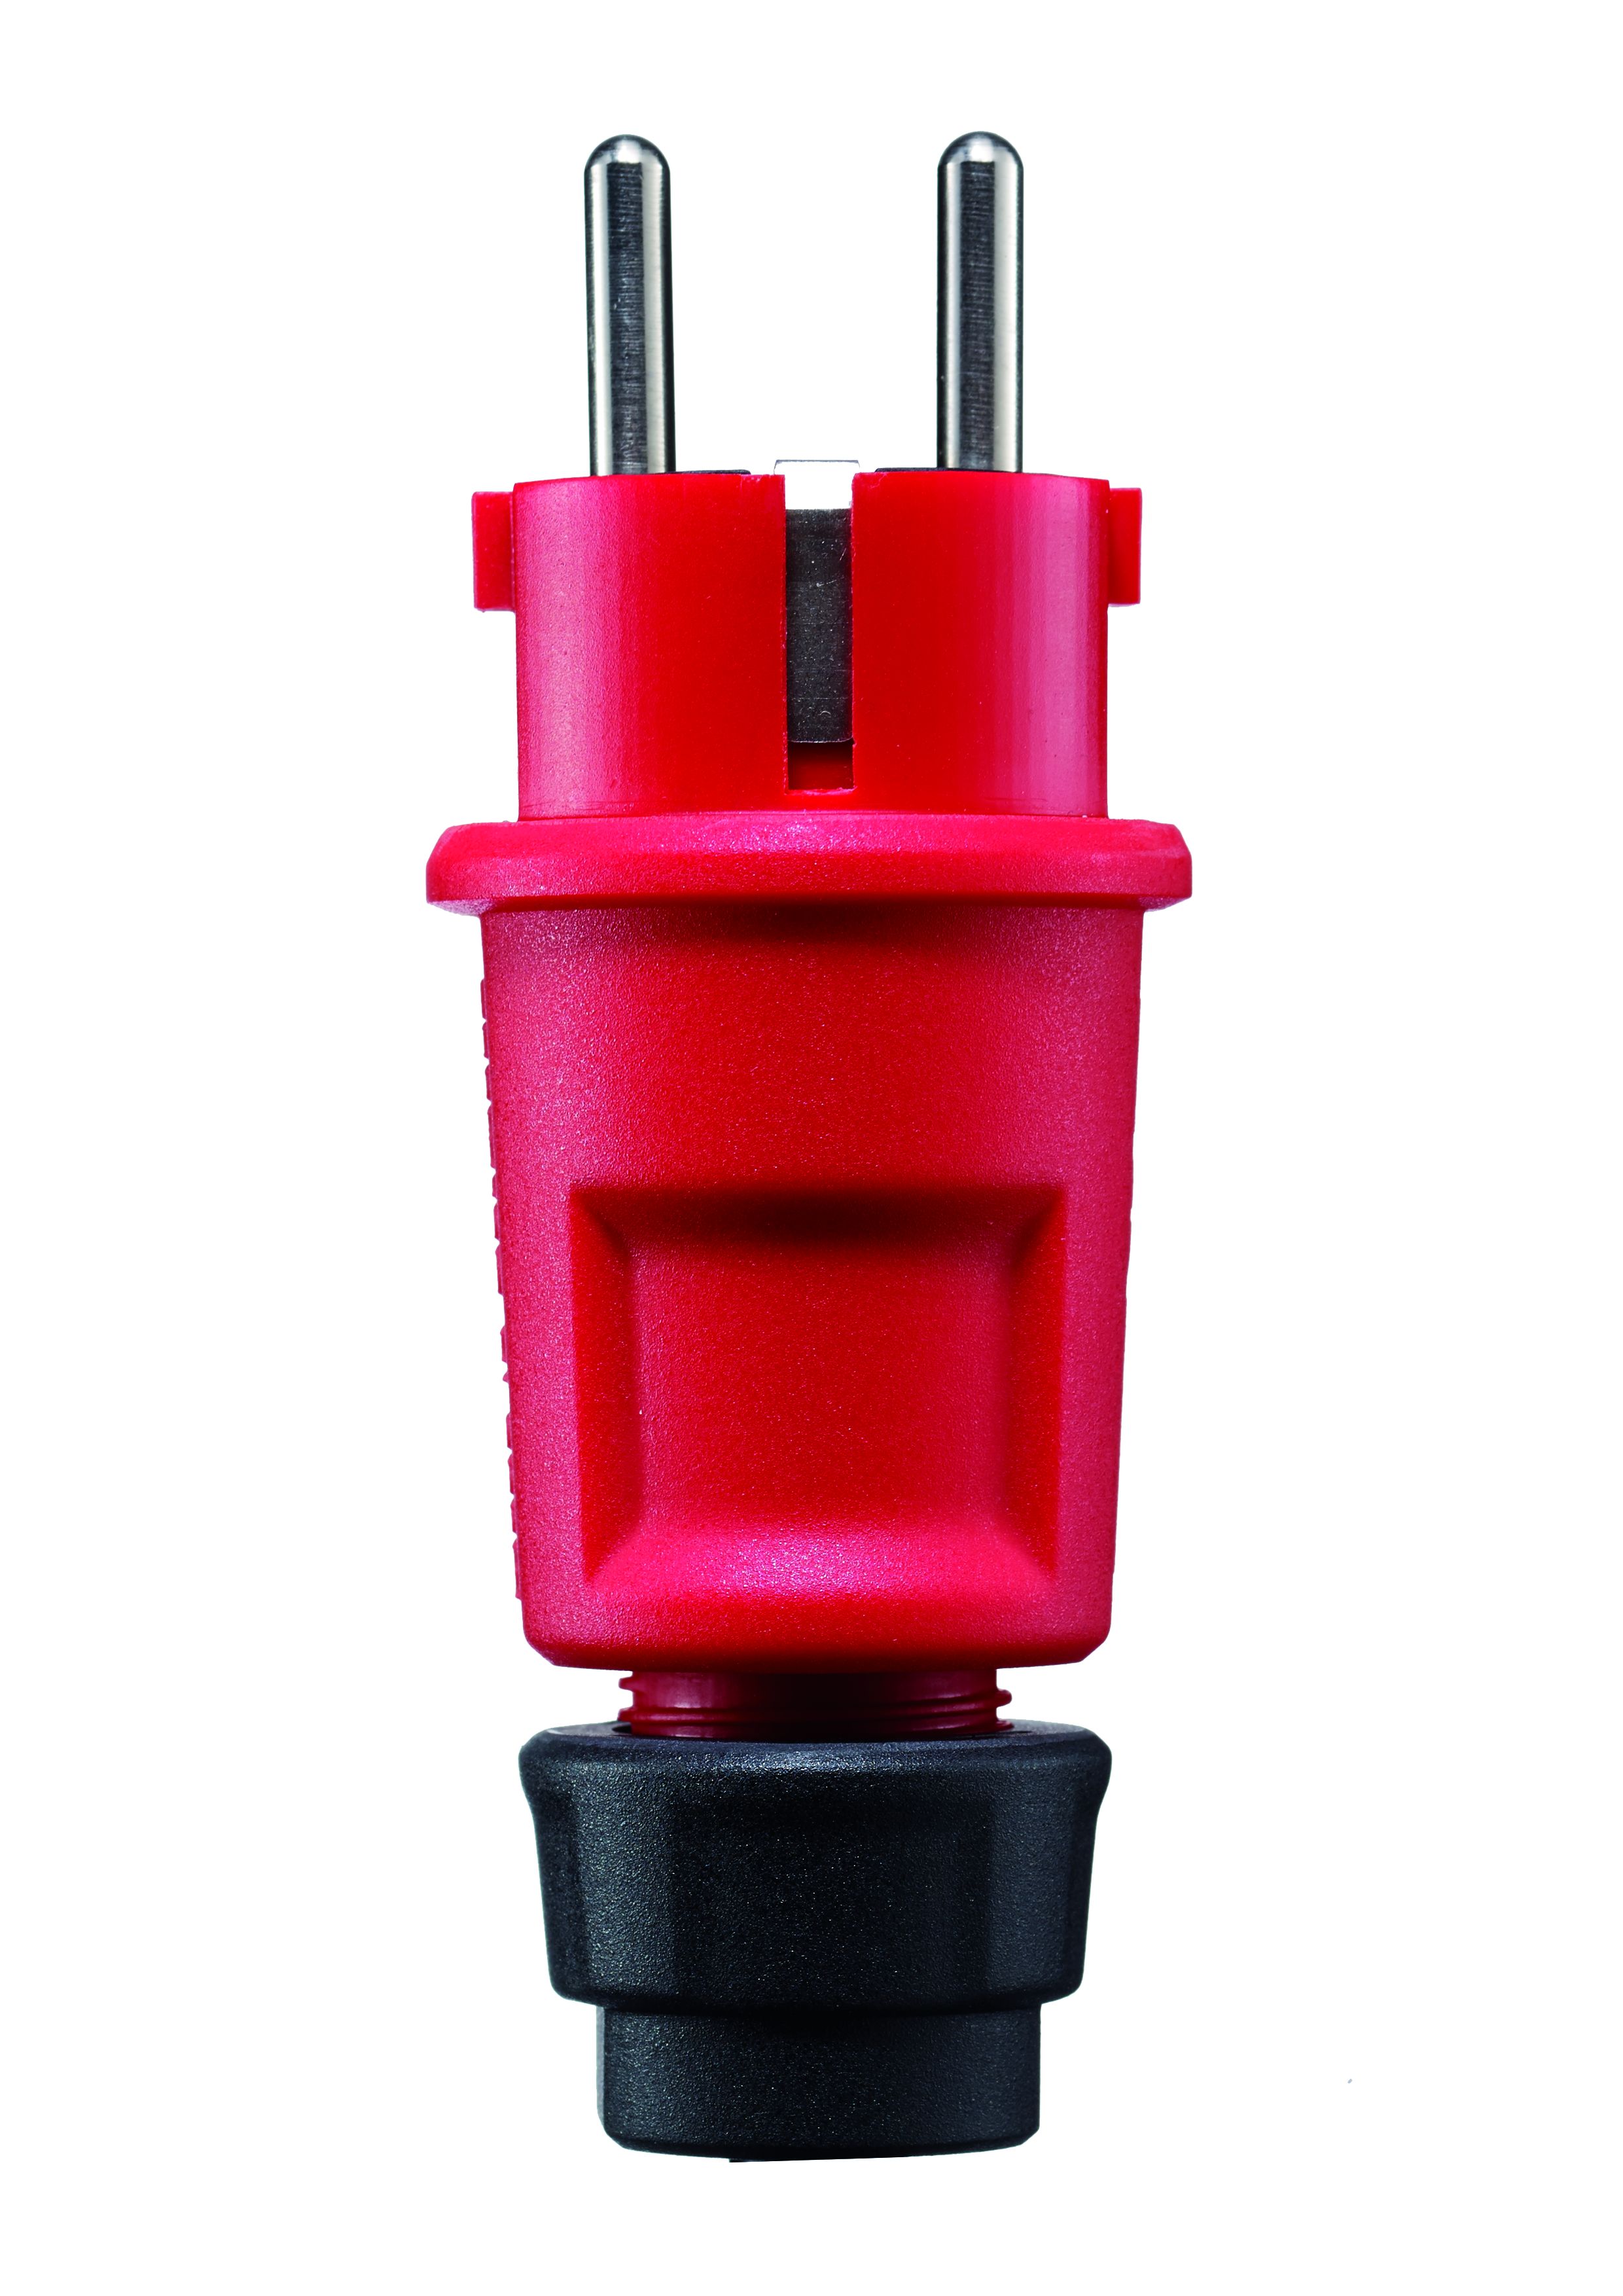 SCHUKO plug, red, Elamid high performance plastic, 2 earthing systems, IP44